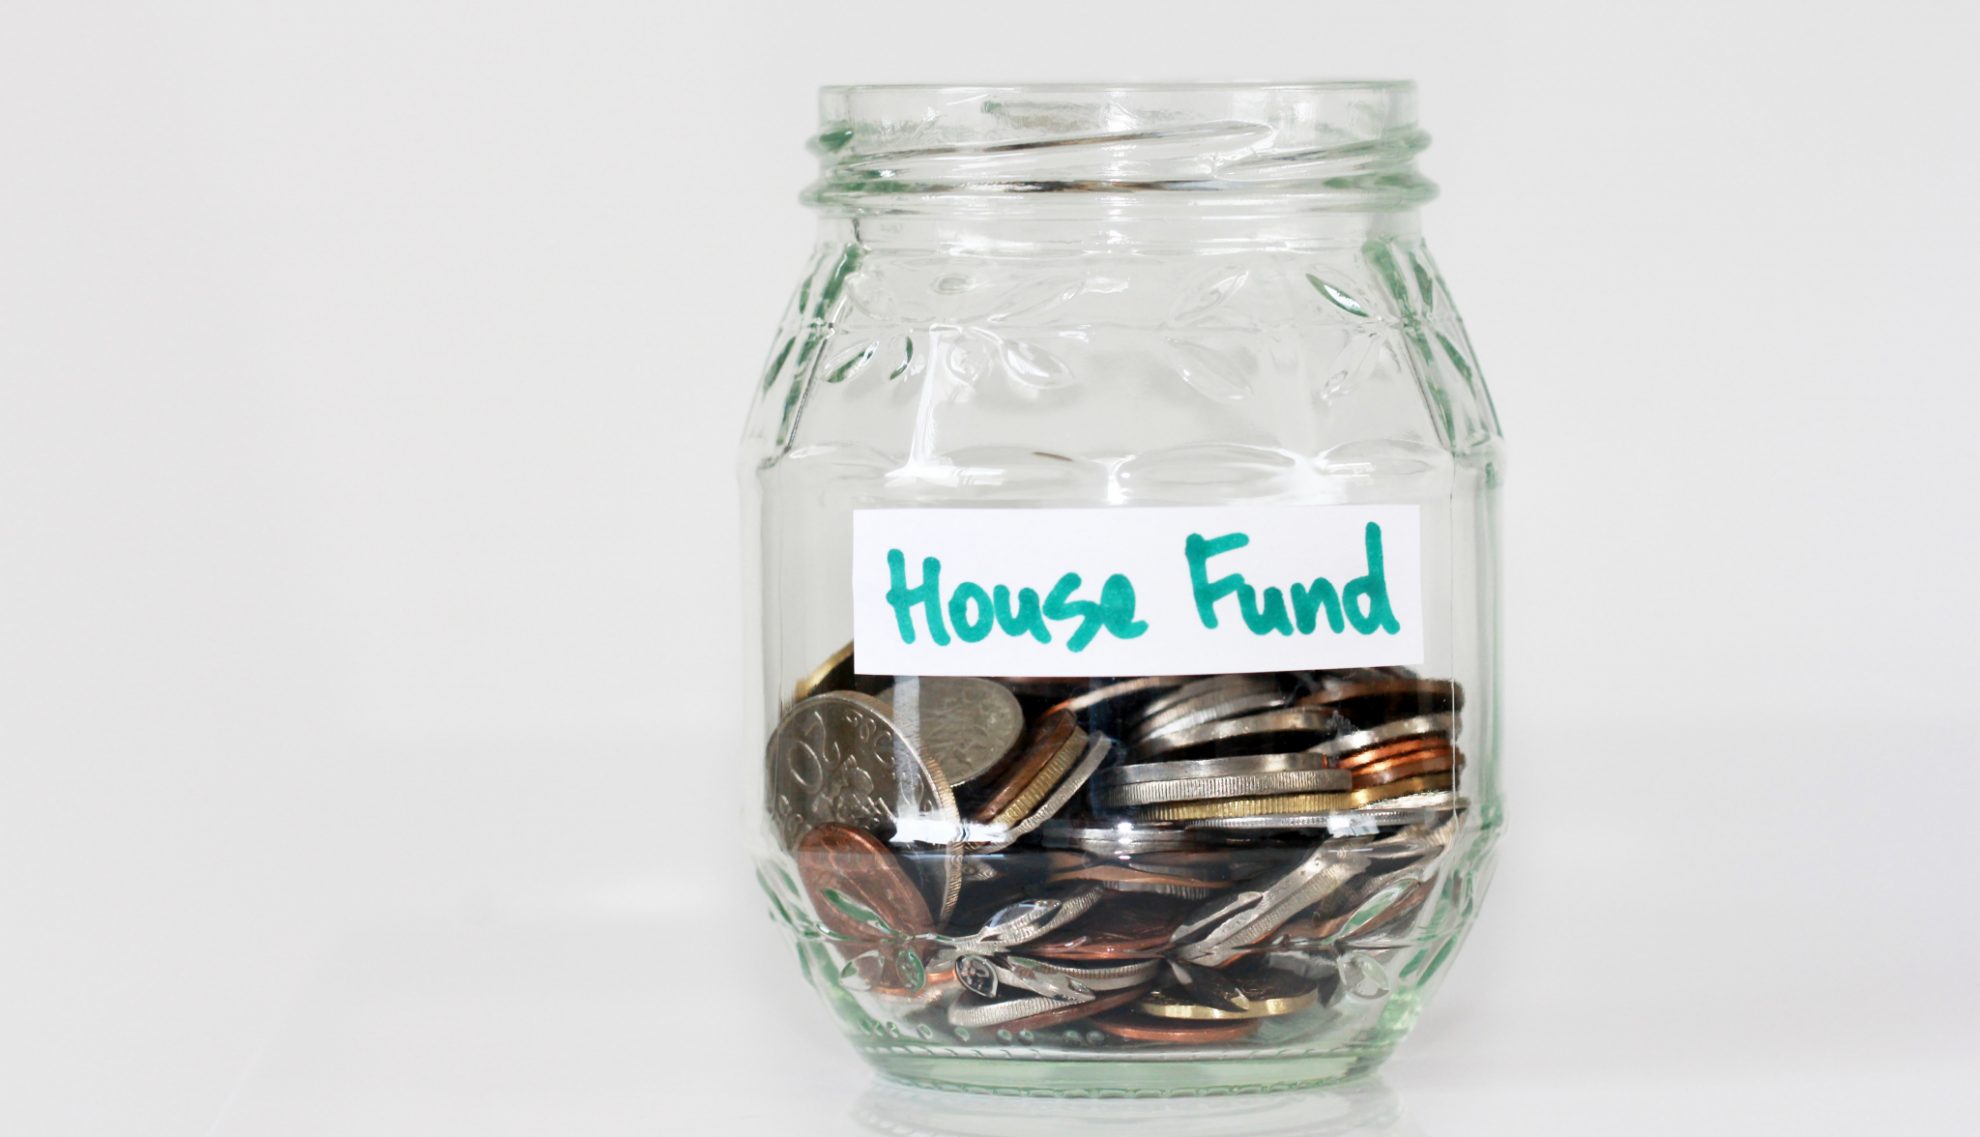 Saving for a house fund